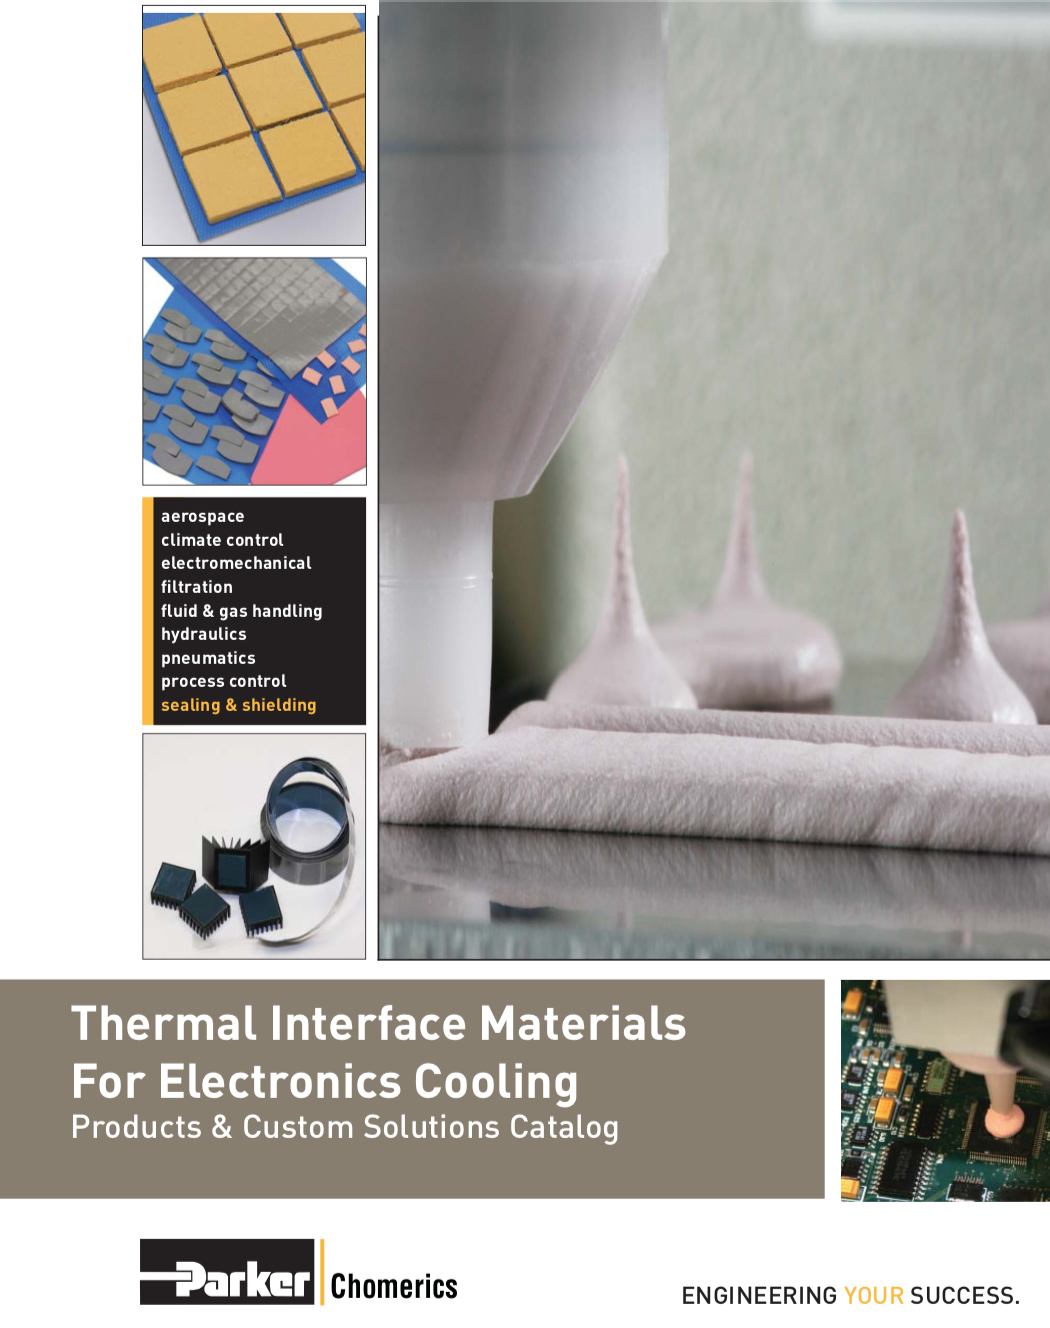 Thermal Interface Materials for Electronics Cooling catalog cover page